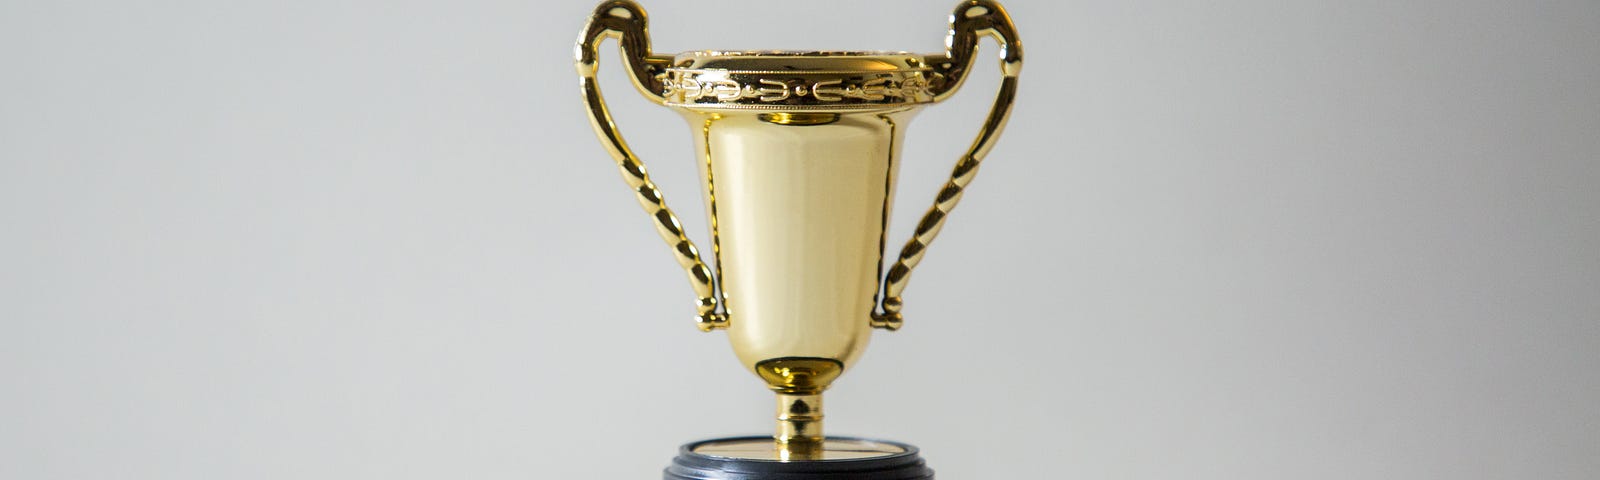 gold winner’s cup on white background